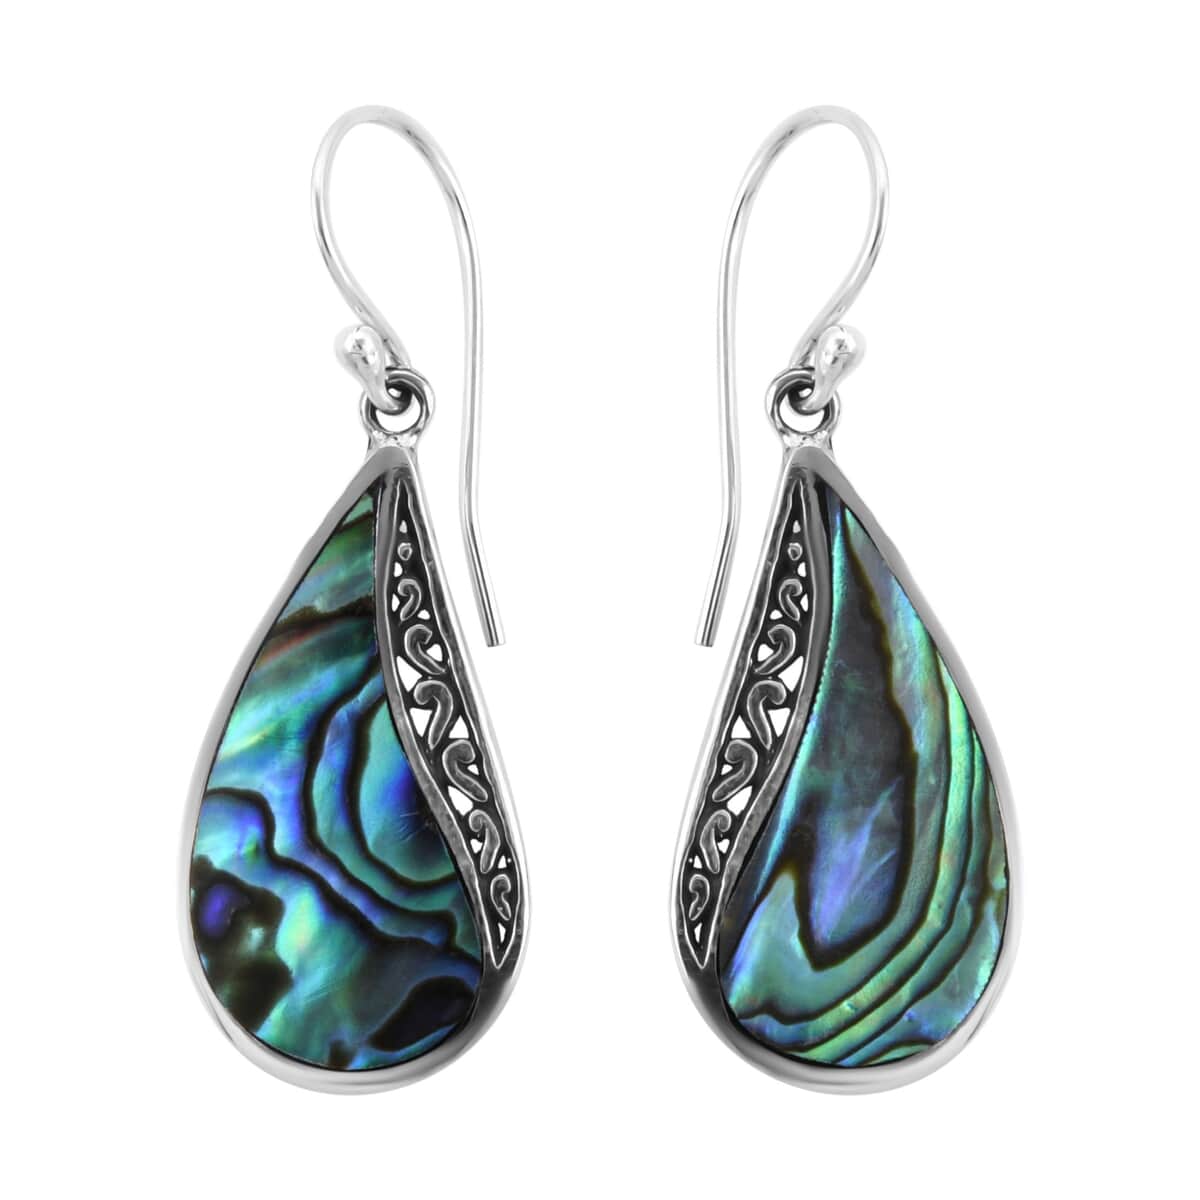 Abalone Shell Drop Earrings For Women in Sterling Silver, Beach Fashion Jewelry image number 0